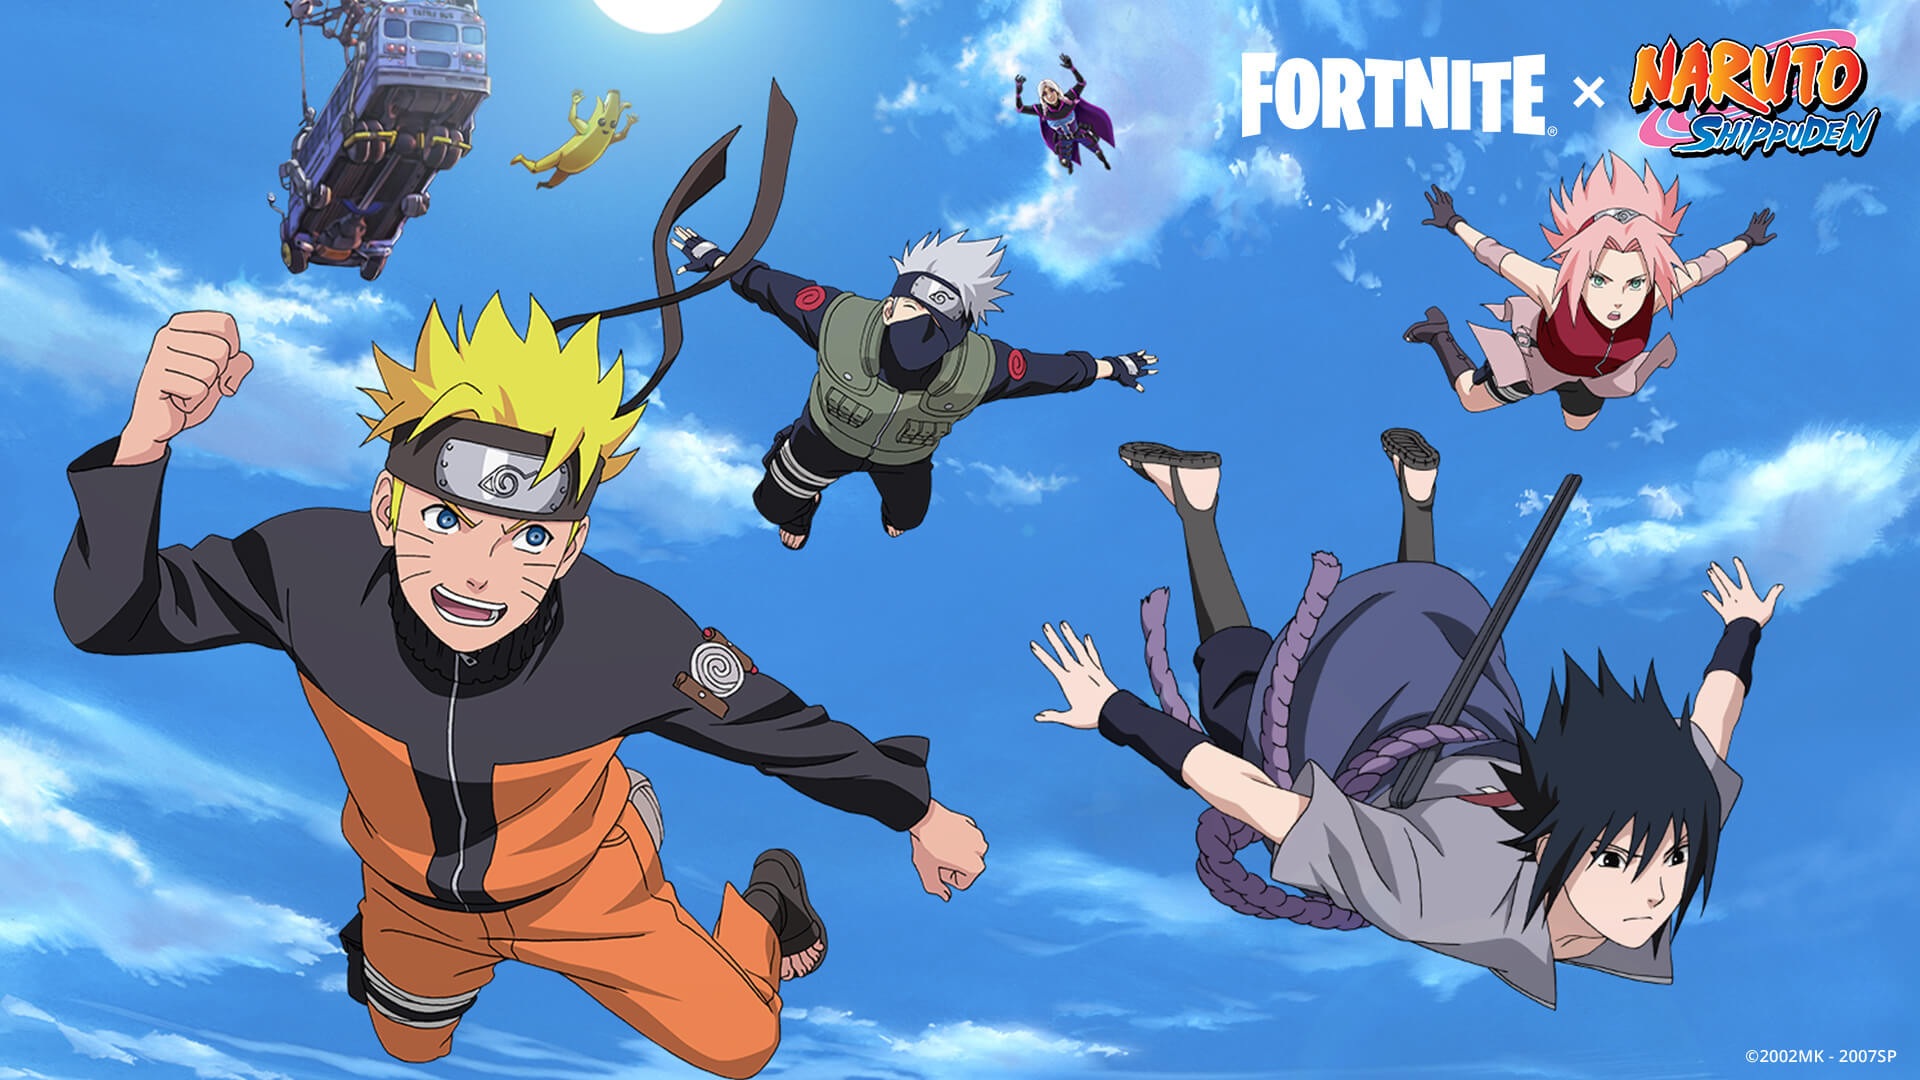 Will Fortnite ever have anime characters like Goku and Naruto in its lore